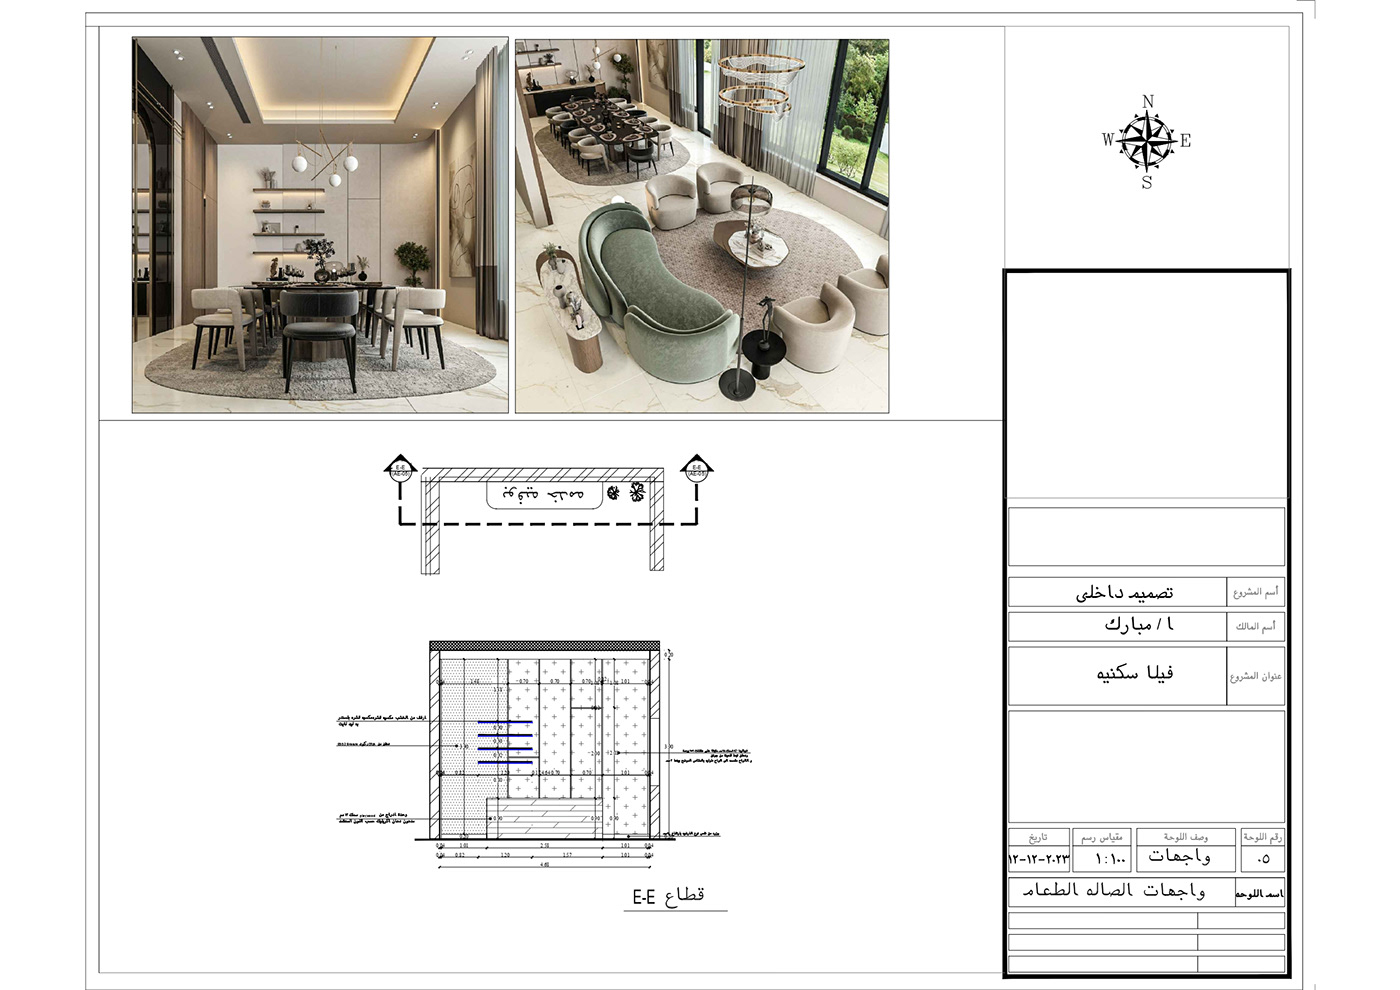 shop drawing architecture interior design  technical drawing AutoCAD